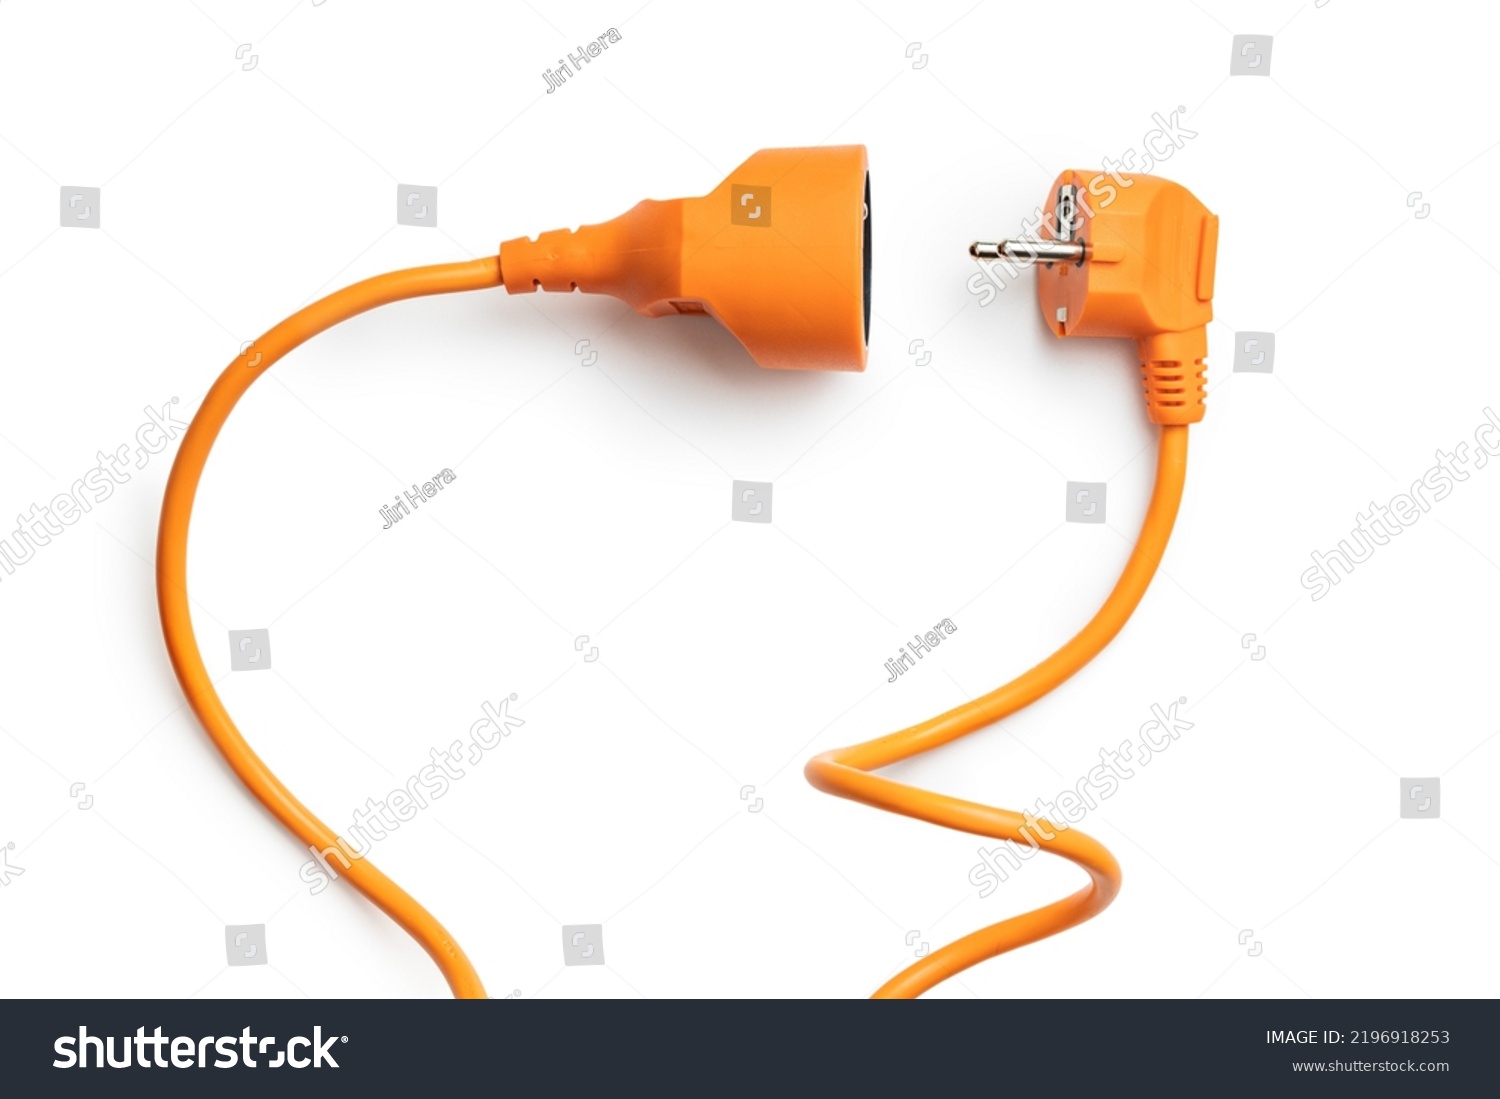 Disconnected orange electric plug and socket isolated on the white background. #2196918253